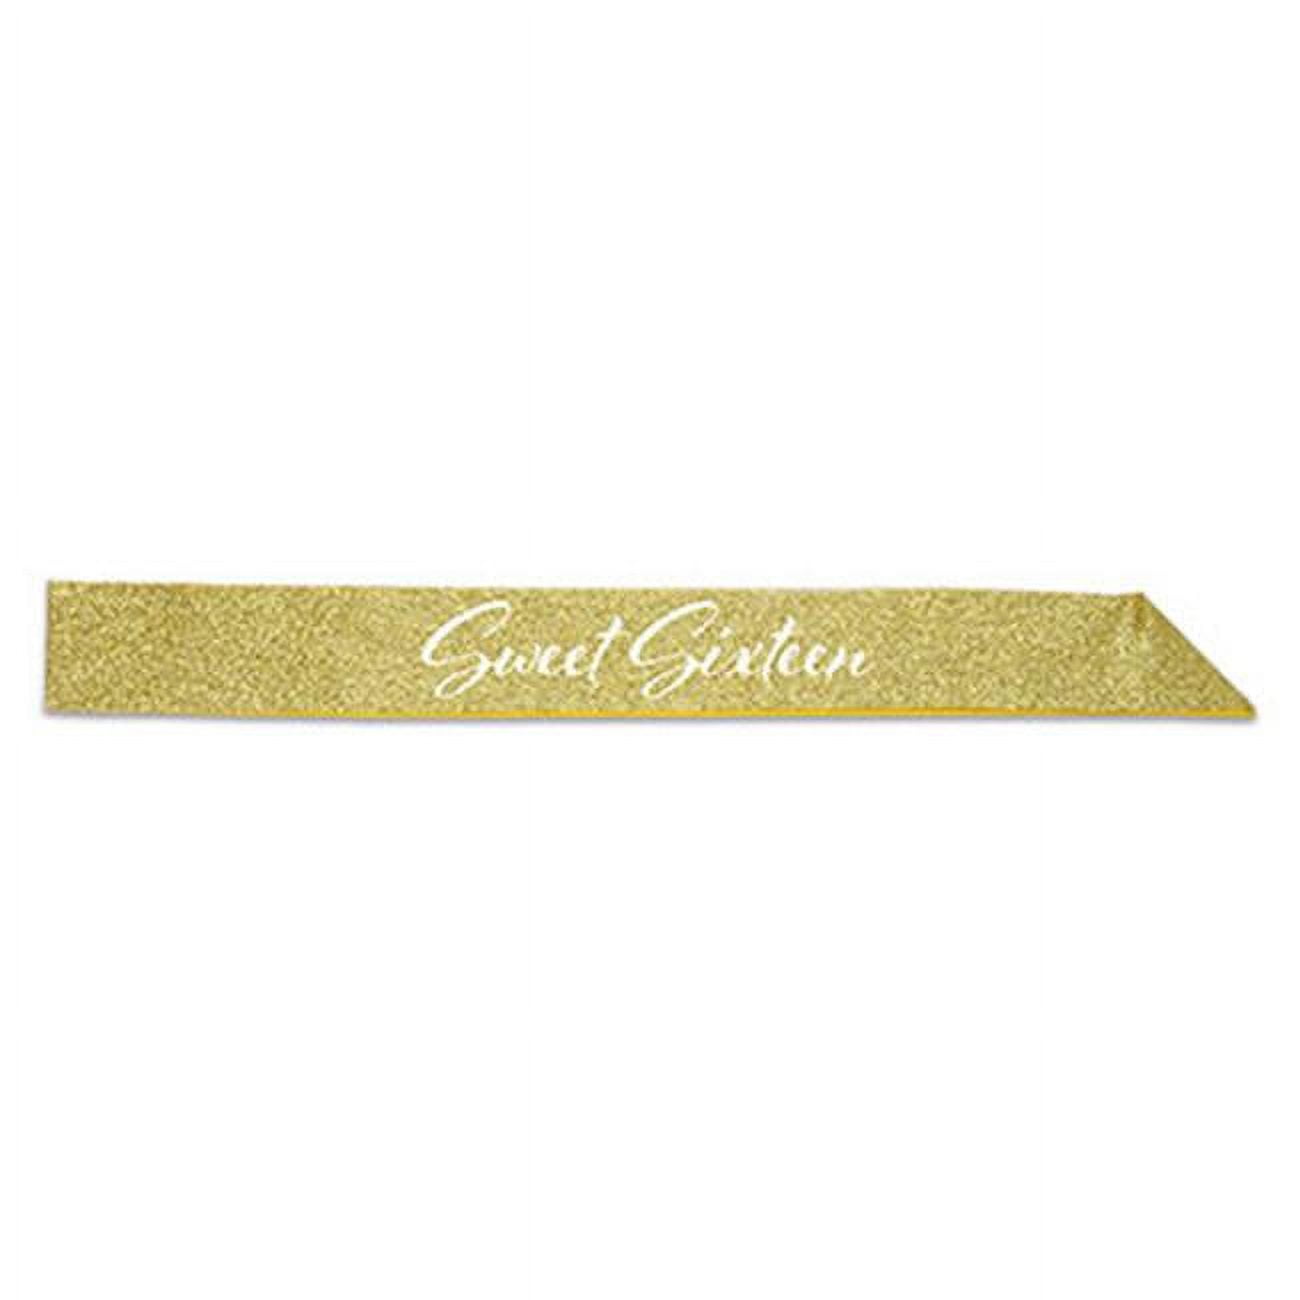 Picture of Beistle 66021 32.5 x 3.5 in. Sweet Sixteen Glittered Sash - Pack of 6